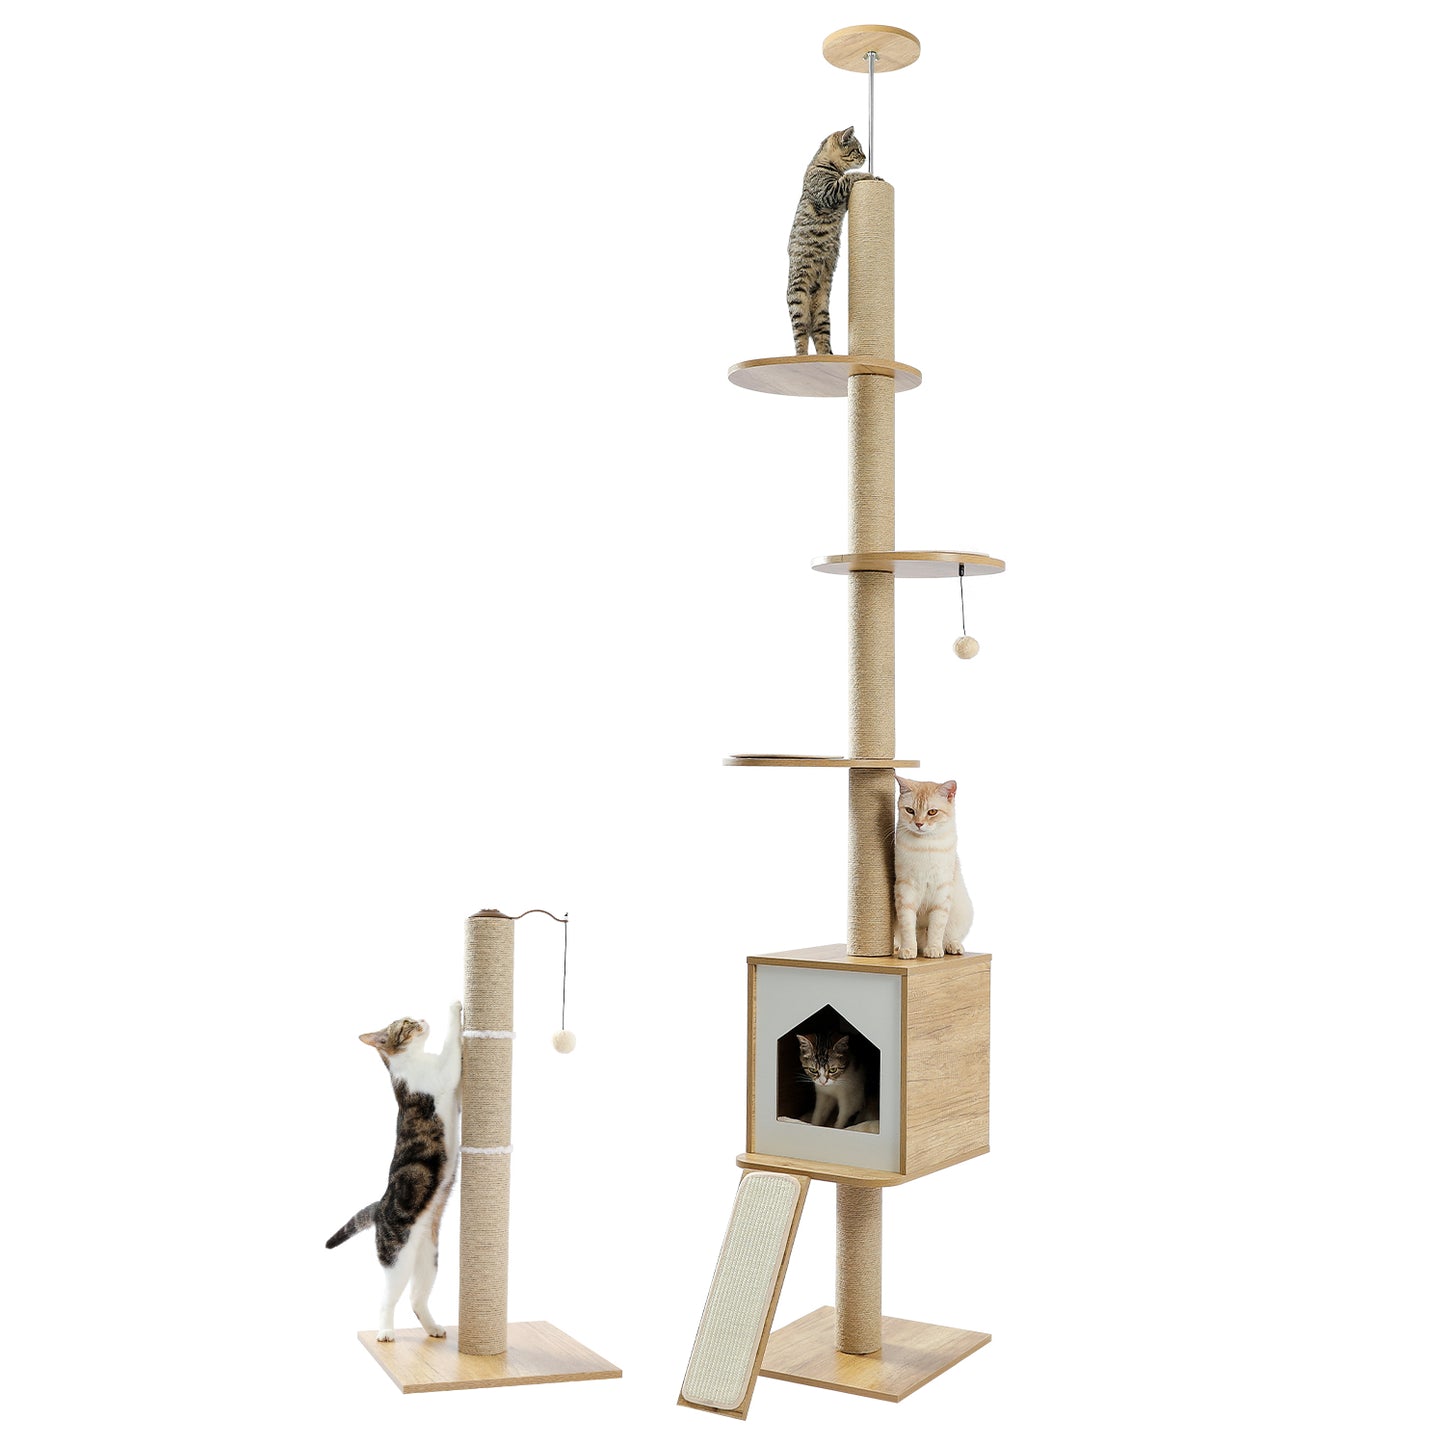 Modern Cat Climbing Tower with a Scratcher Multi-layer Floor-to-Ceiling Cat Tree with Condo Scratching Post Toy 260cm Beige